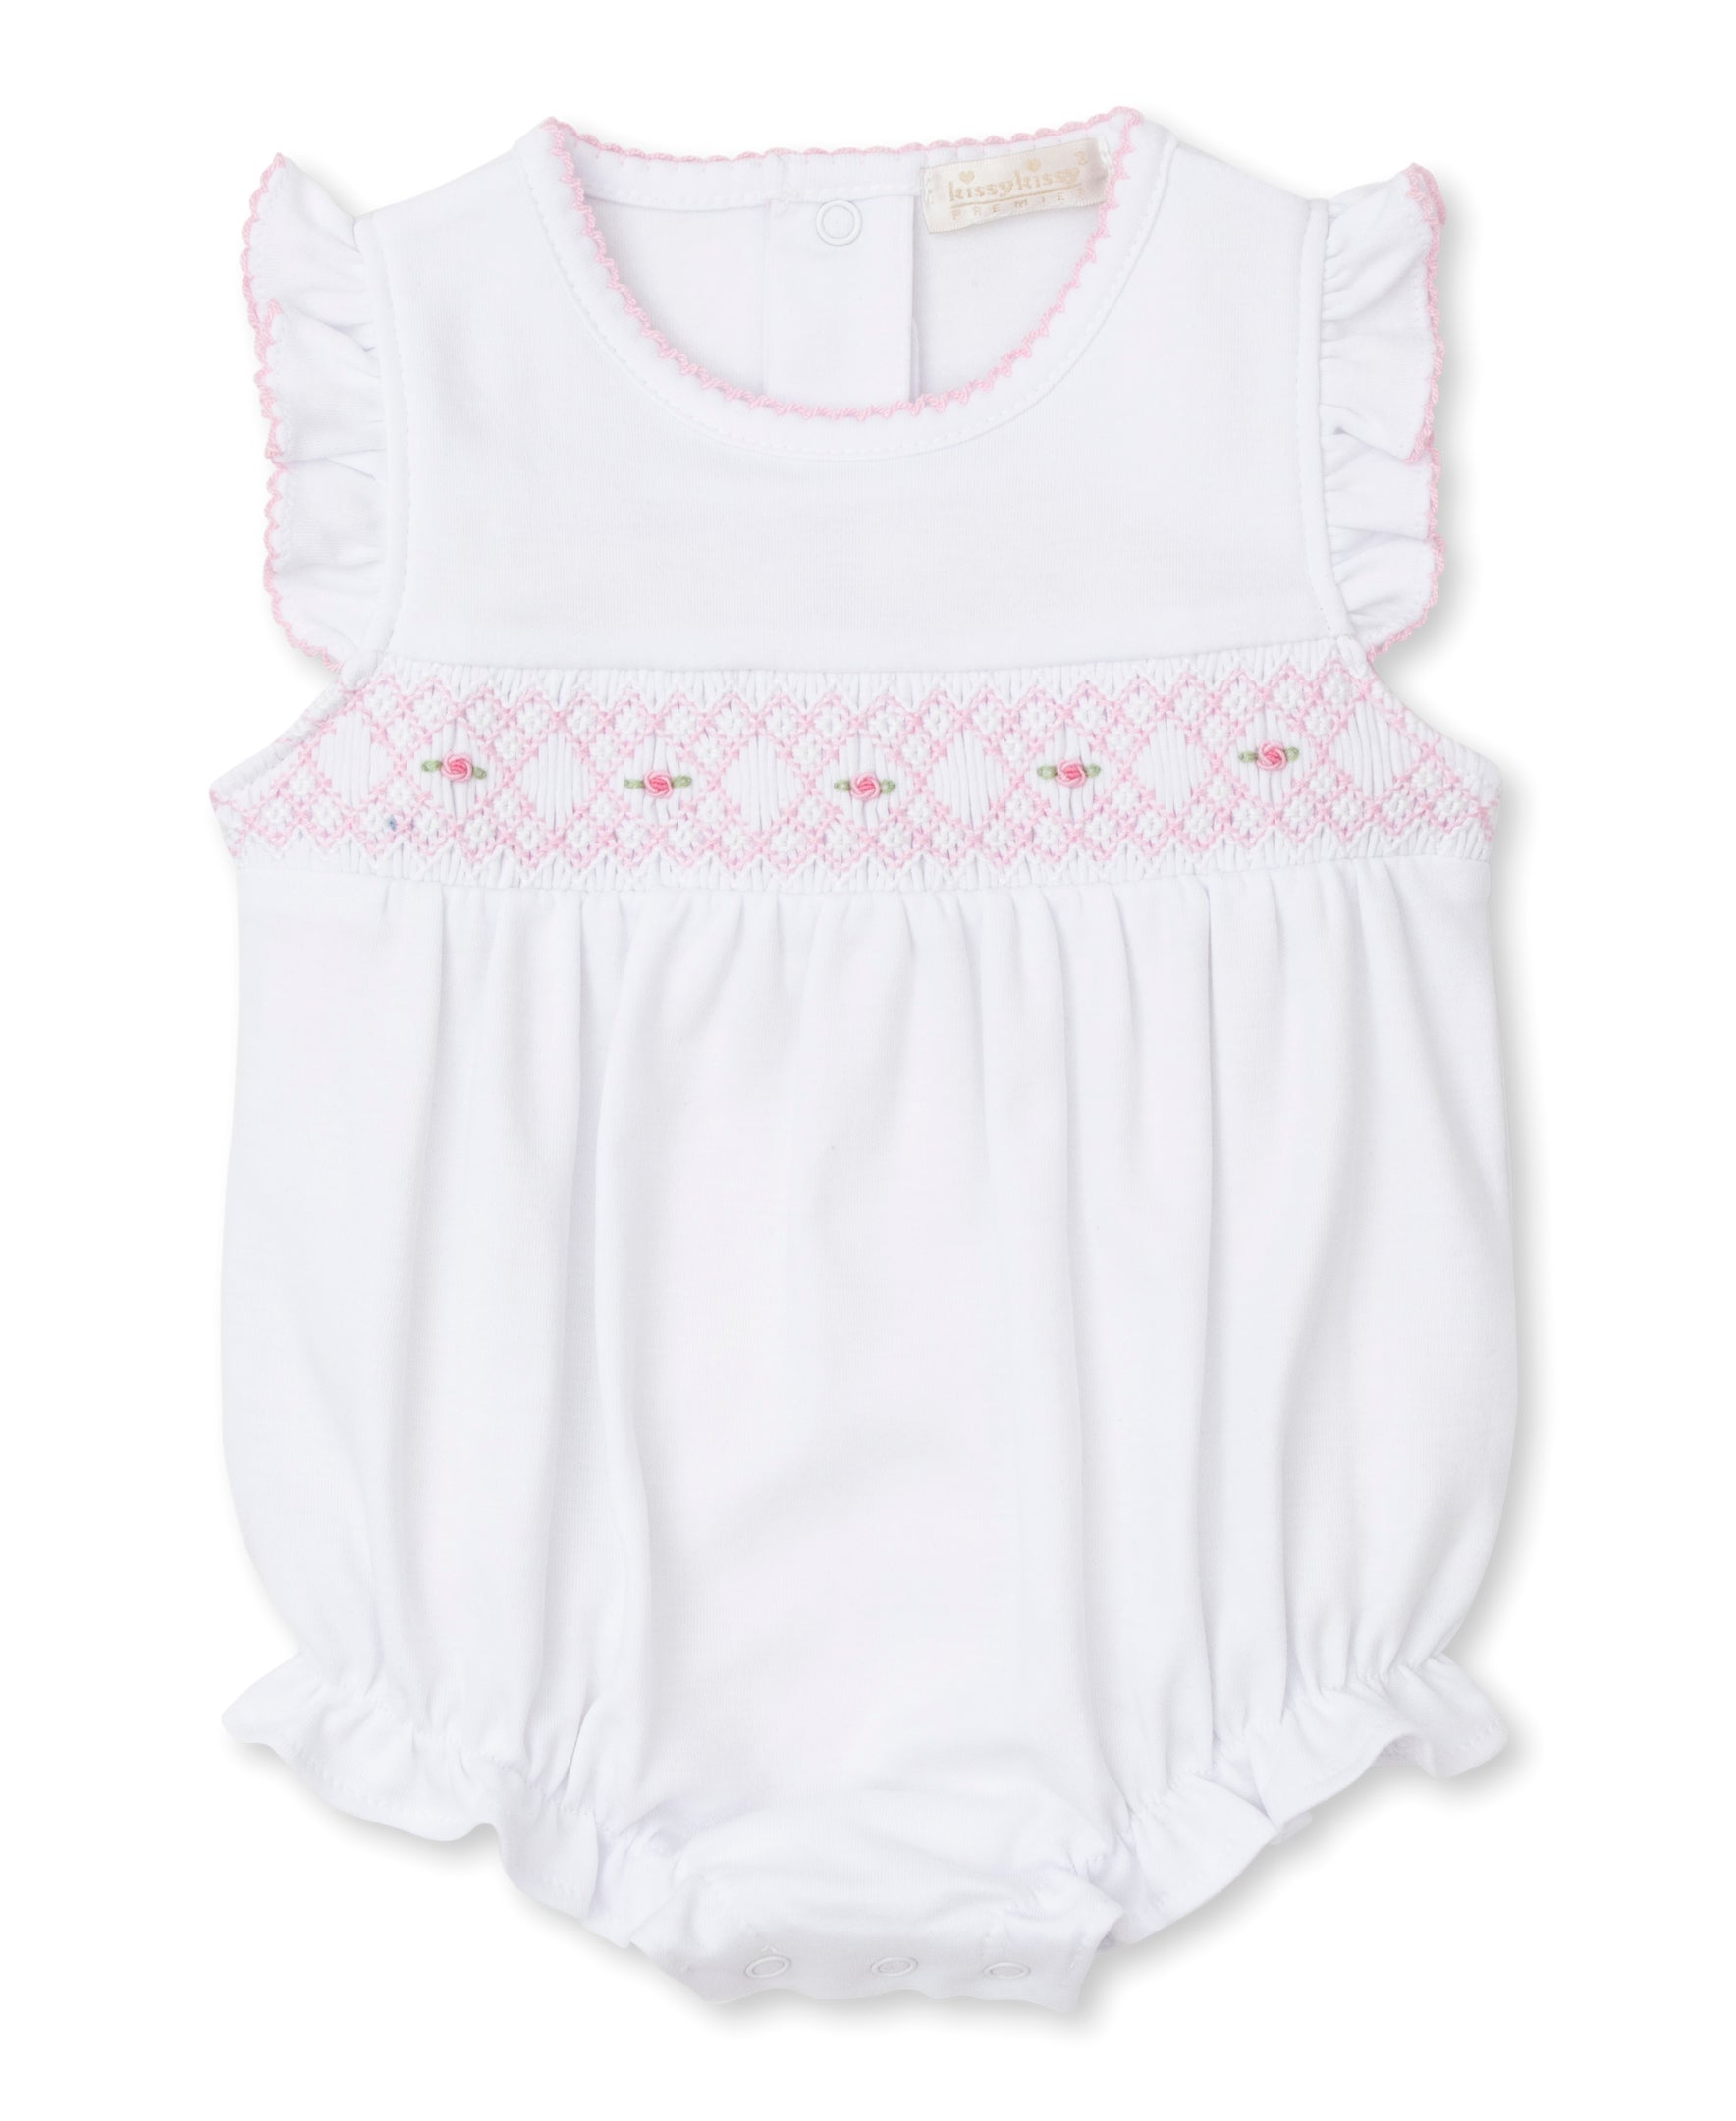 CLB Summer 24 White/Pink Hand Smocked Bubble - Kissy Kissy